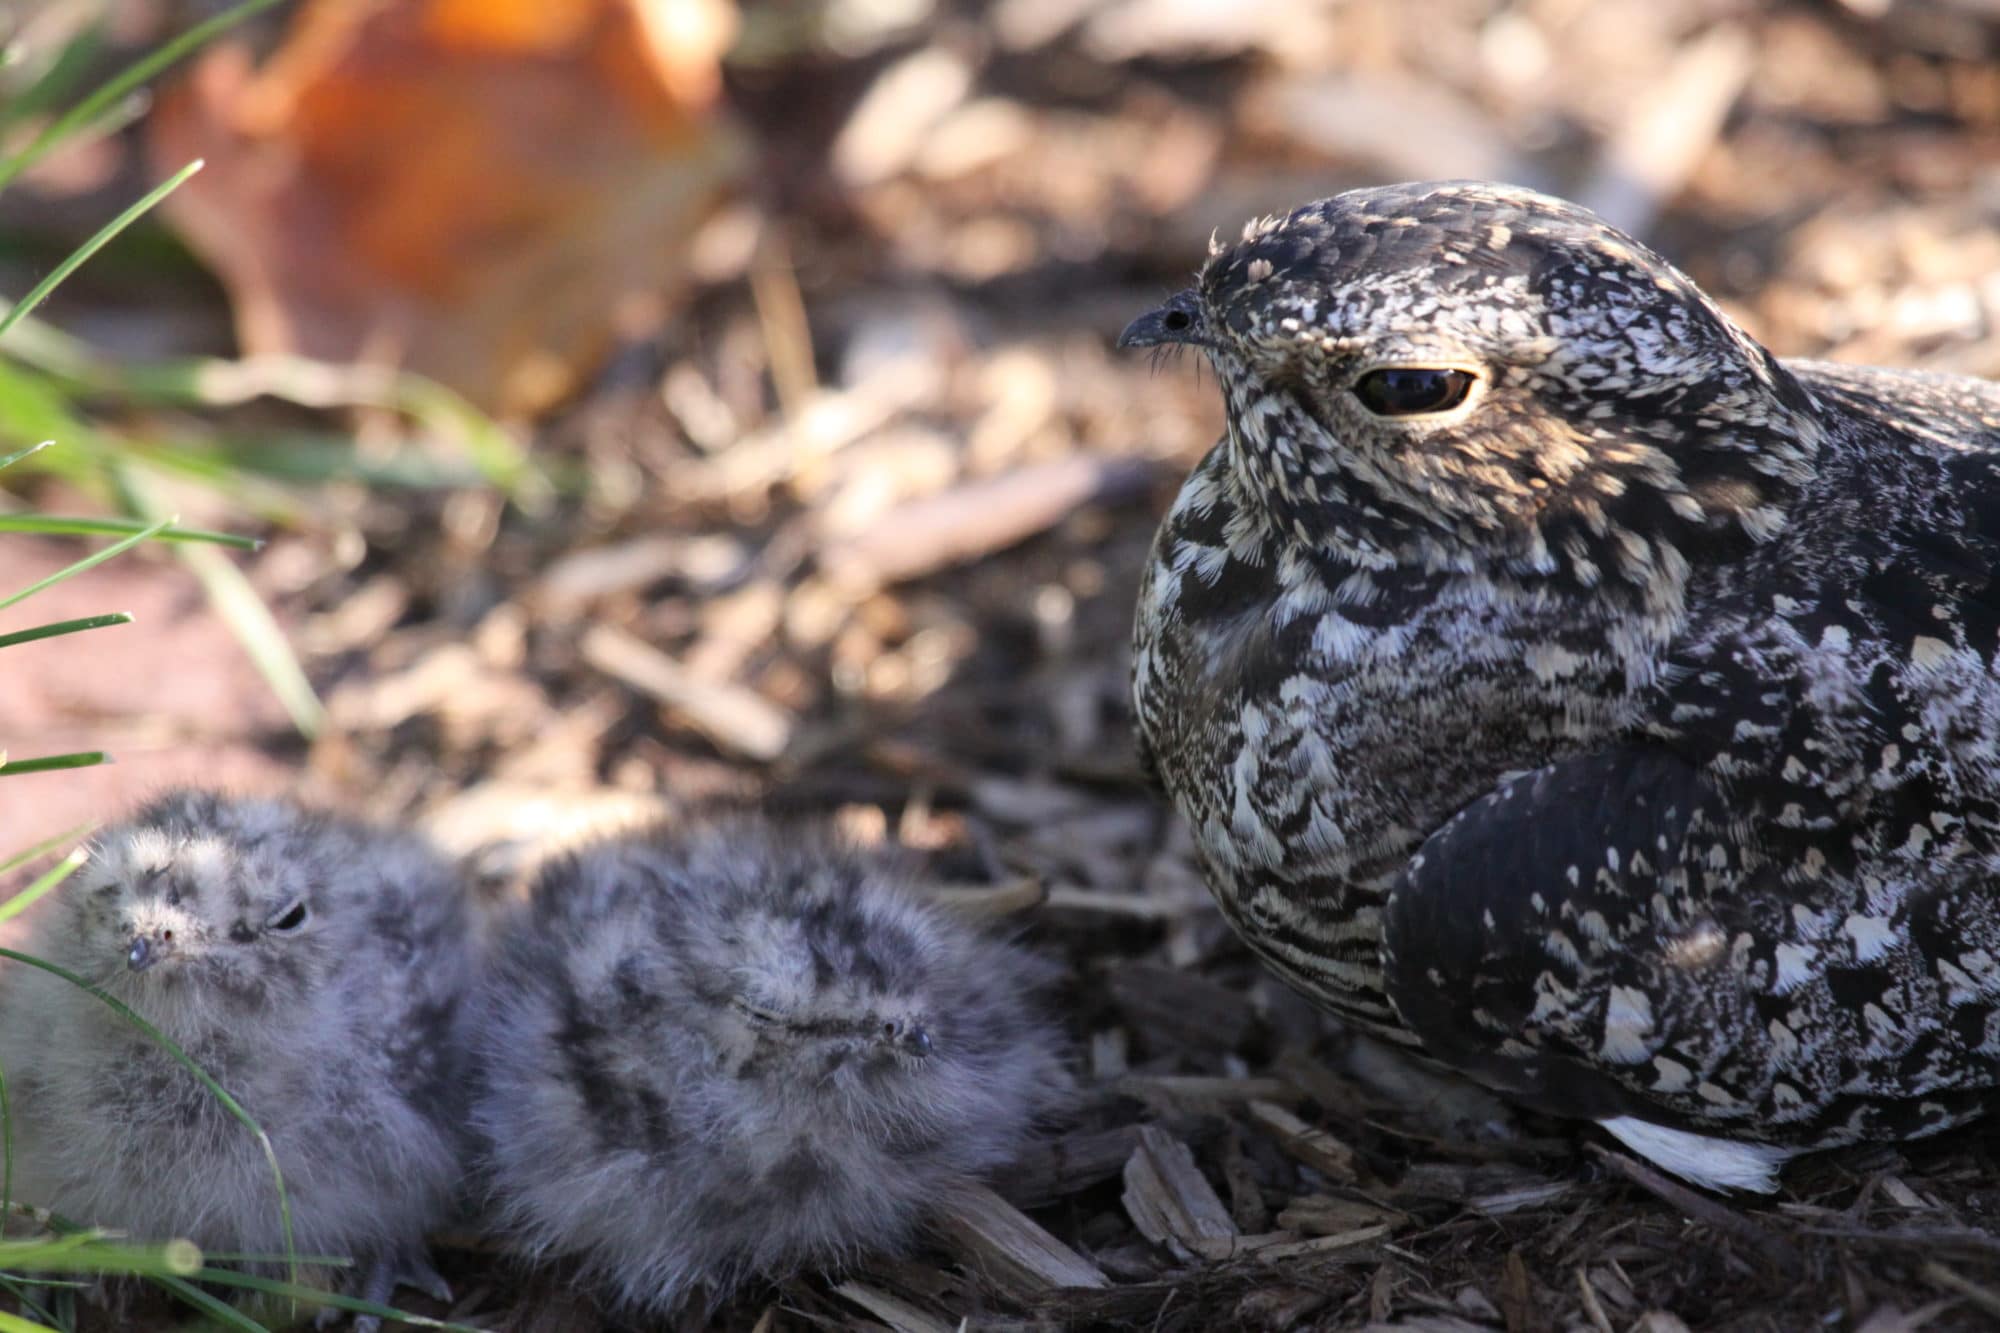 A (non-NH) mother nighthawk with two chicks. (photo © Adam C. Smith Photography)